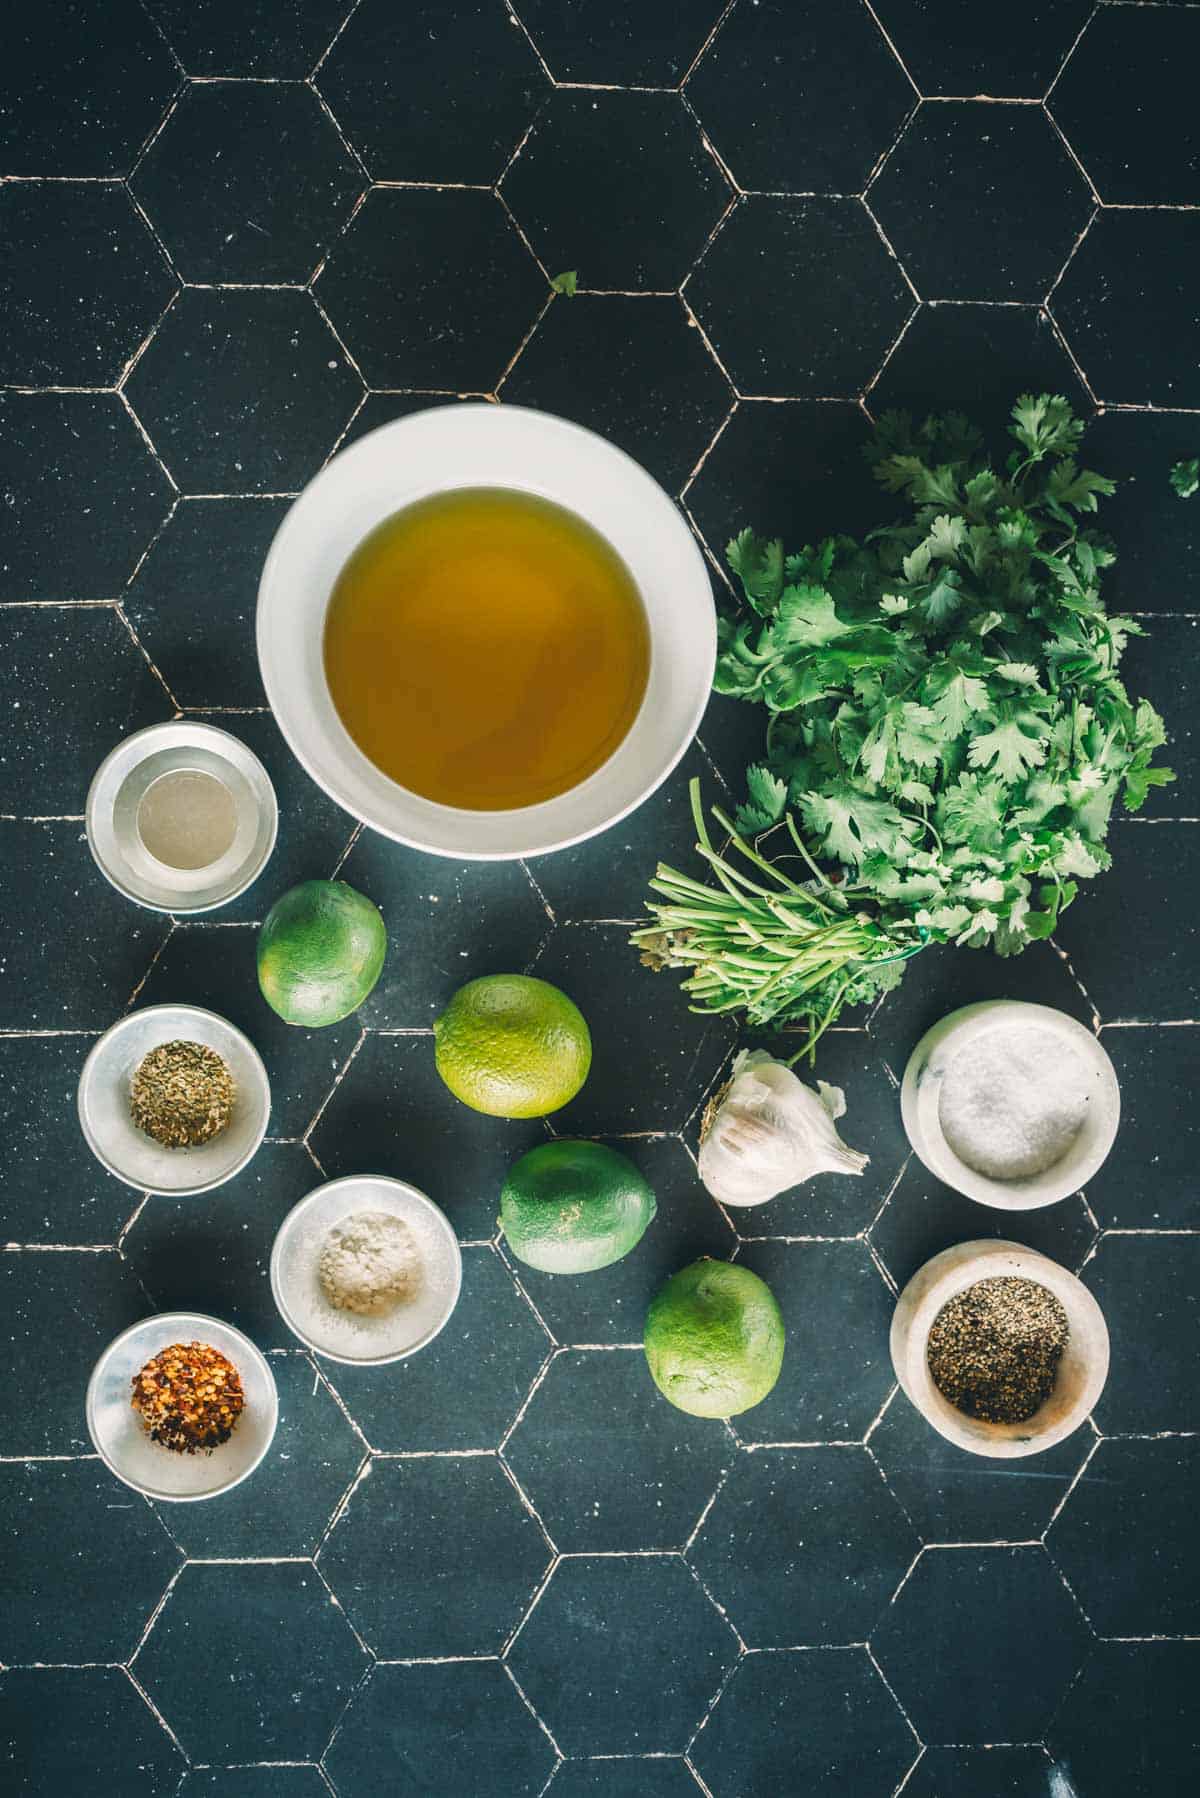 Overhead view of a table with various cooking ingredients, including a bowl of oil, bunch of cilantro, limes, garlic, and small bowls containing spices and seasonings.